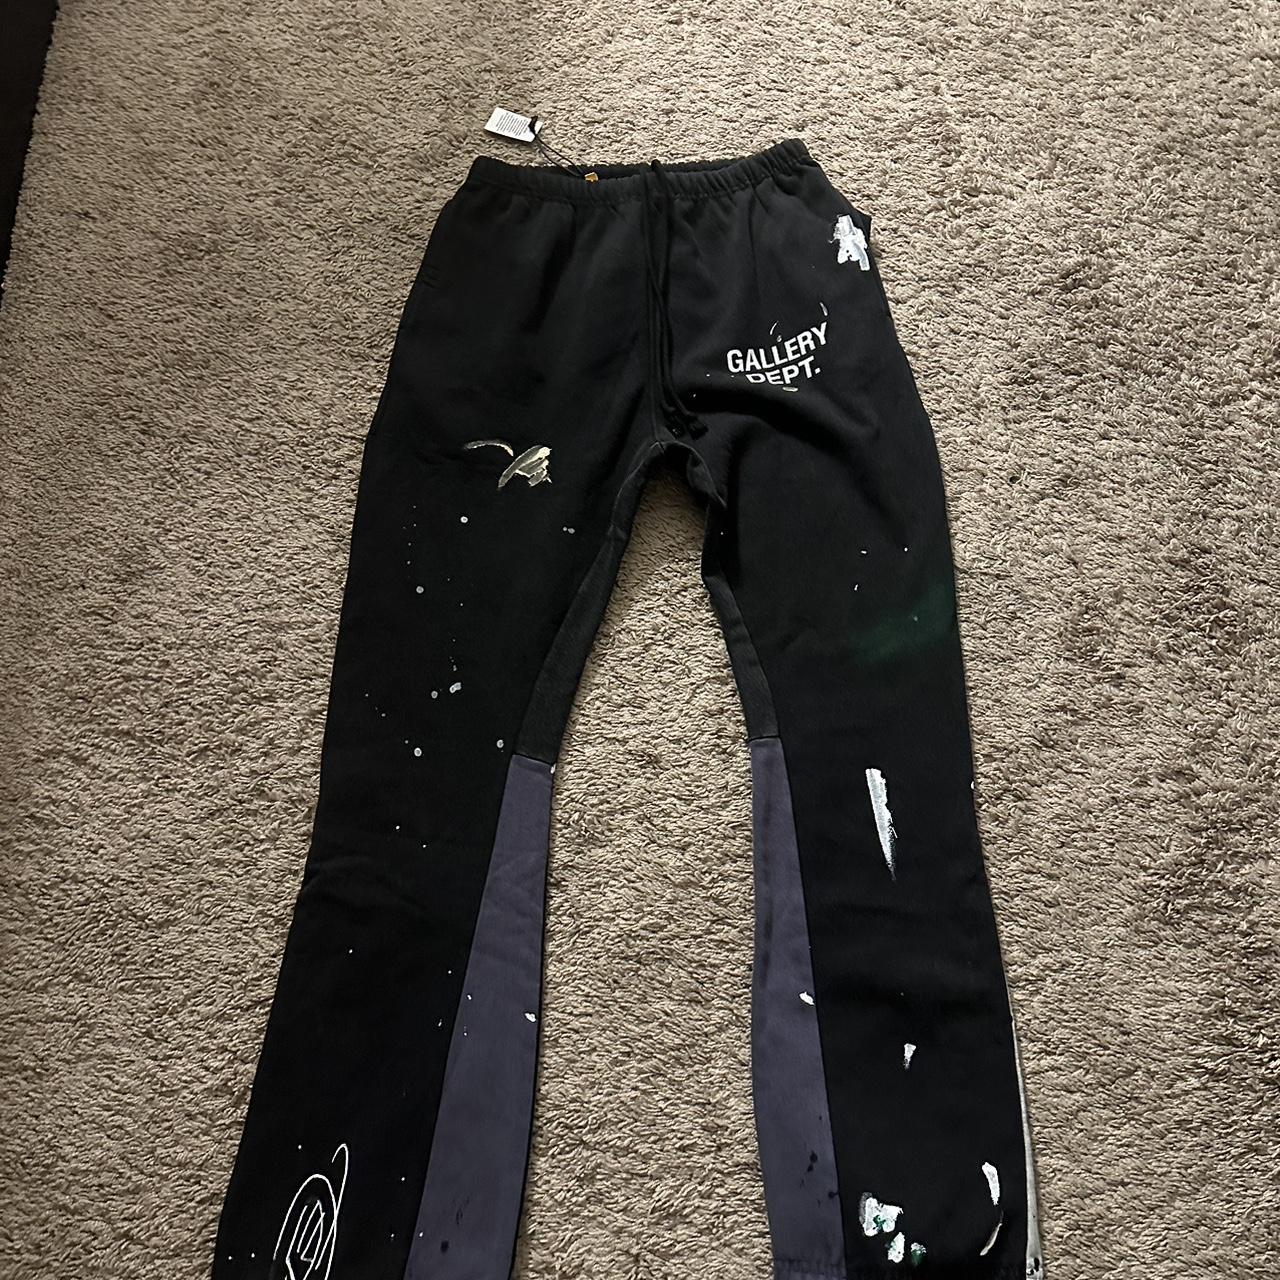 Gallery Dept. Flared Sweatpants sizes small and... - Depop